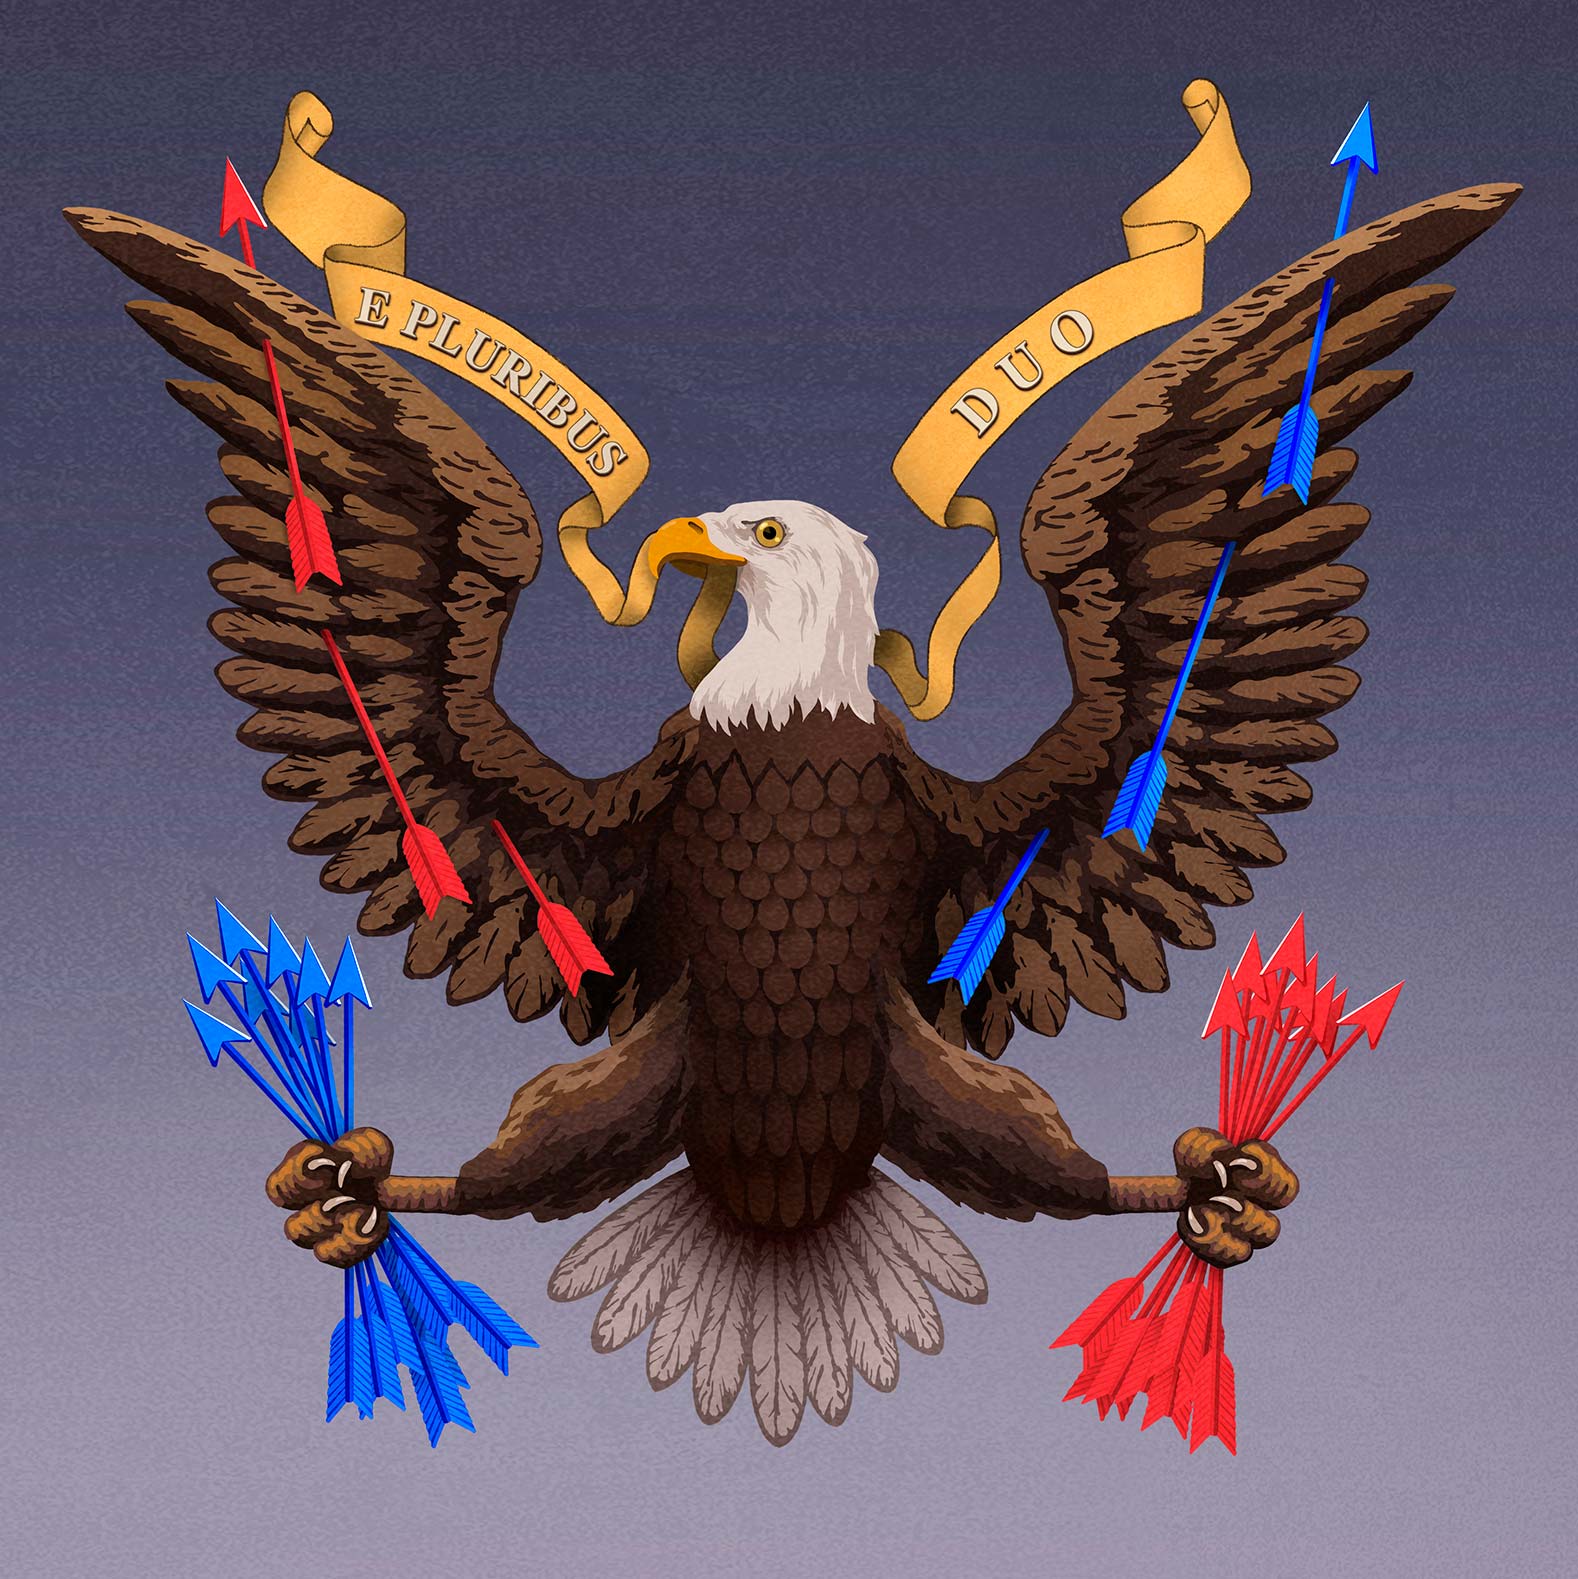 An illustration of an eagle holding blue arrows and red arrows in its talons